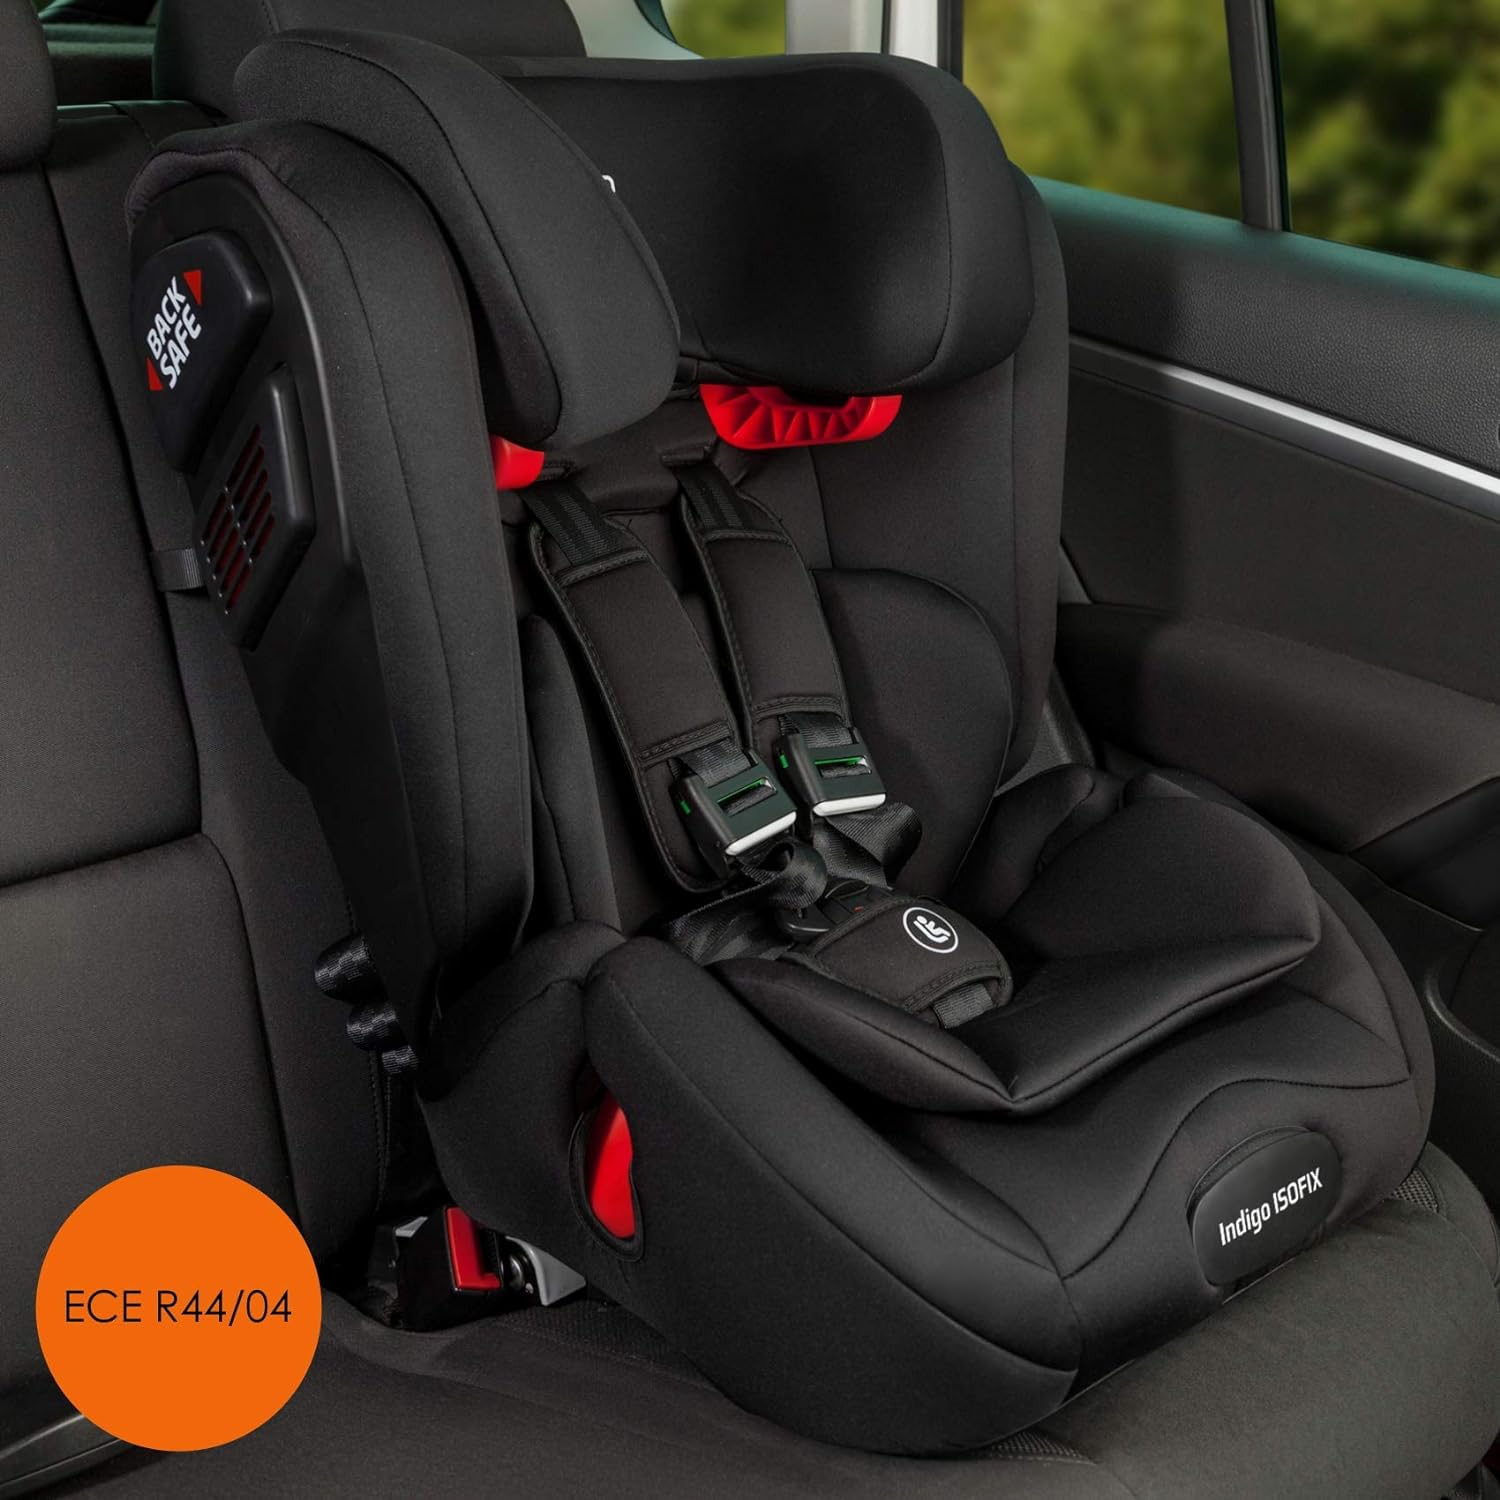 BABYLON Indigo Isofix Car Seat Group 1/2/3 Child Seat 9-36 kg (1 to 12 Years) Child Seat with Top Tether 5 Point Safety Belt ECE R44/04 Blue